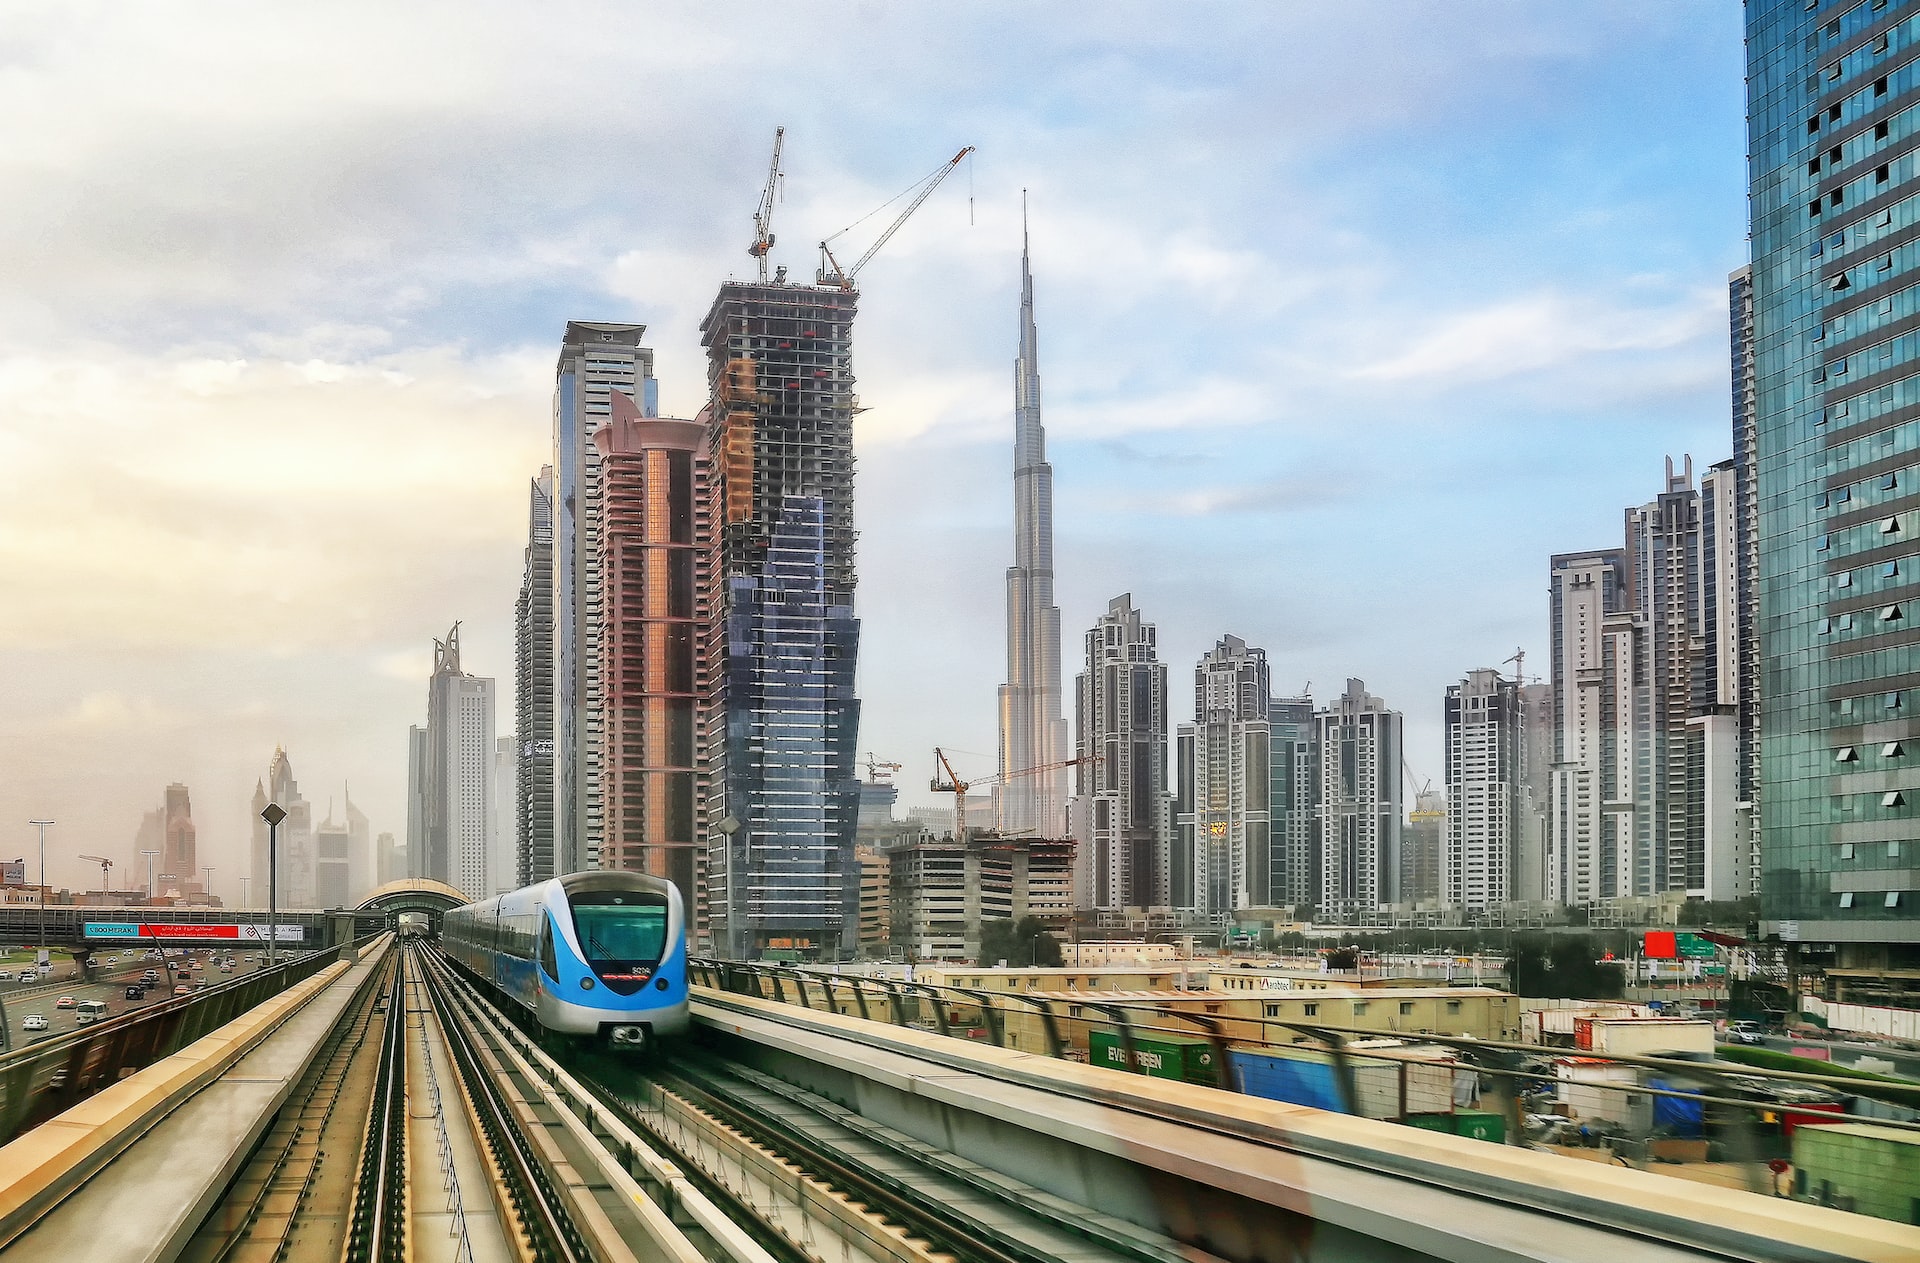 Beginner's guide - a blue Dubai metro train rides on tracks with the city skyline in the background.